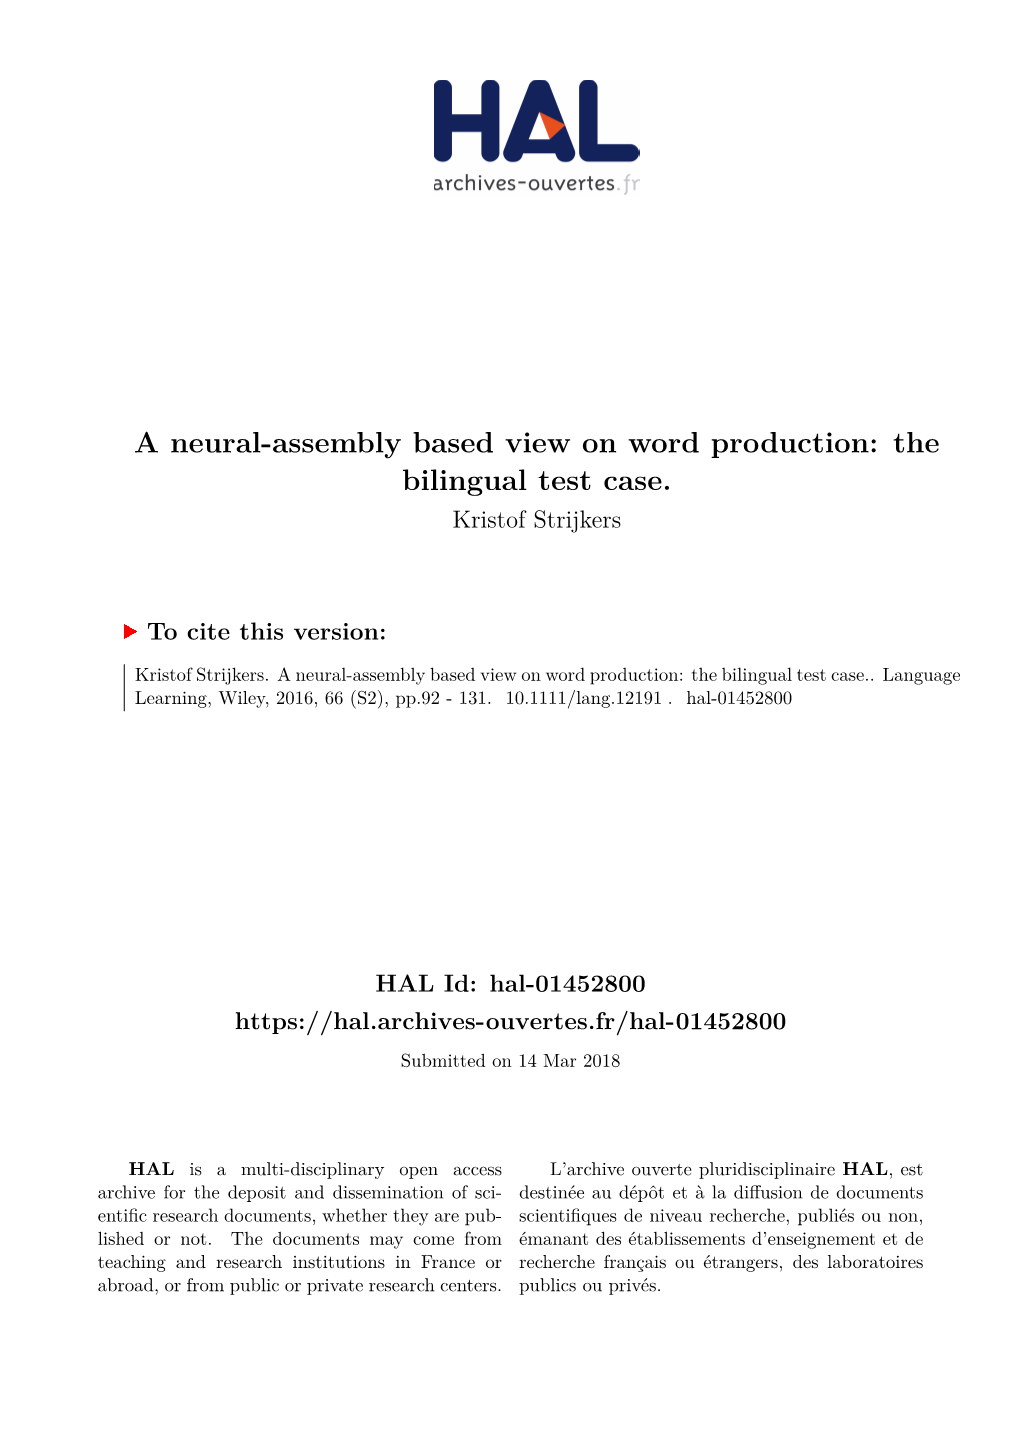 A Neural-Assembly Based View on Word Production: the Bilingual Test Case